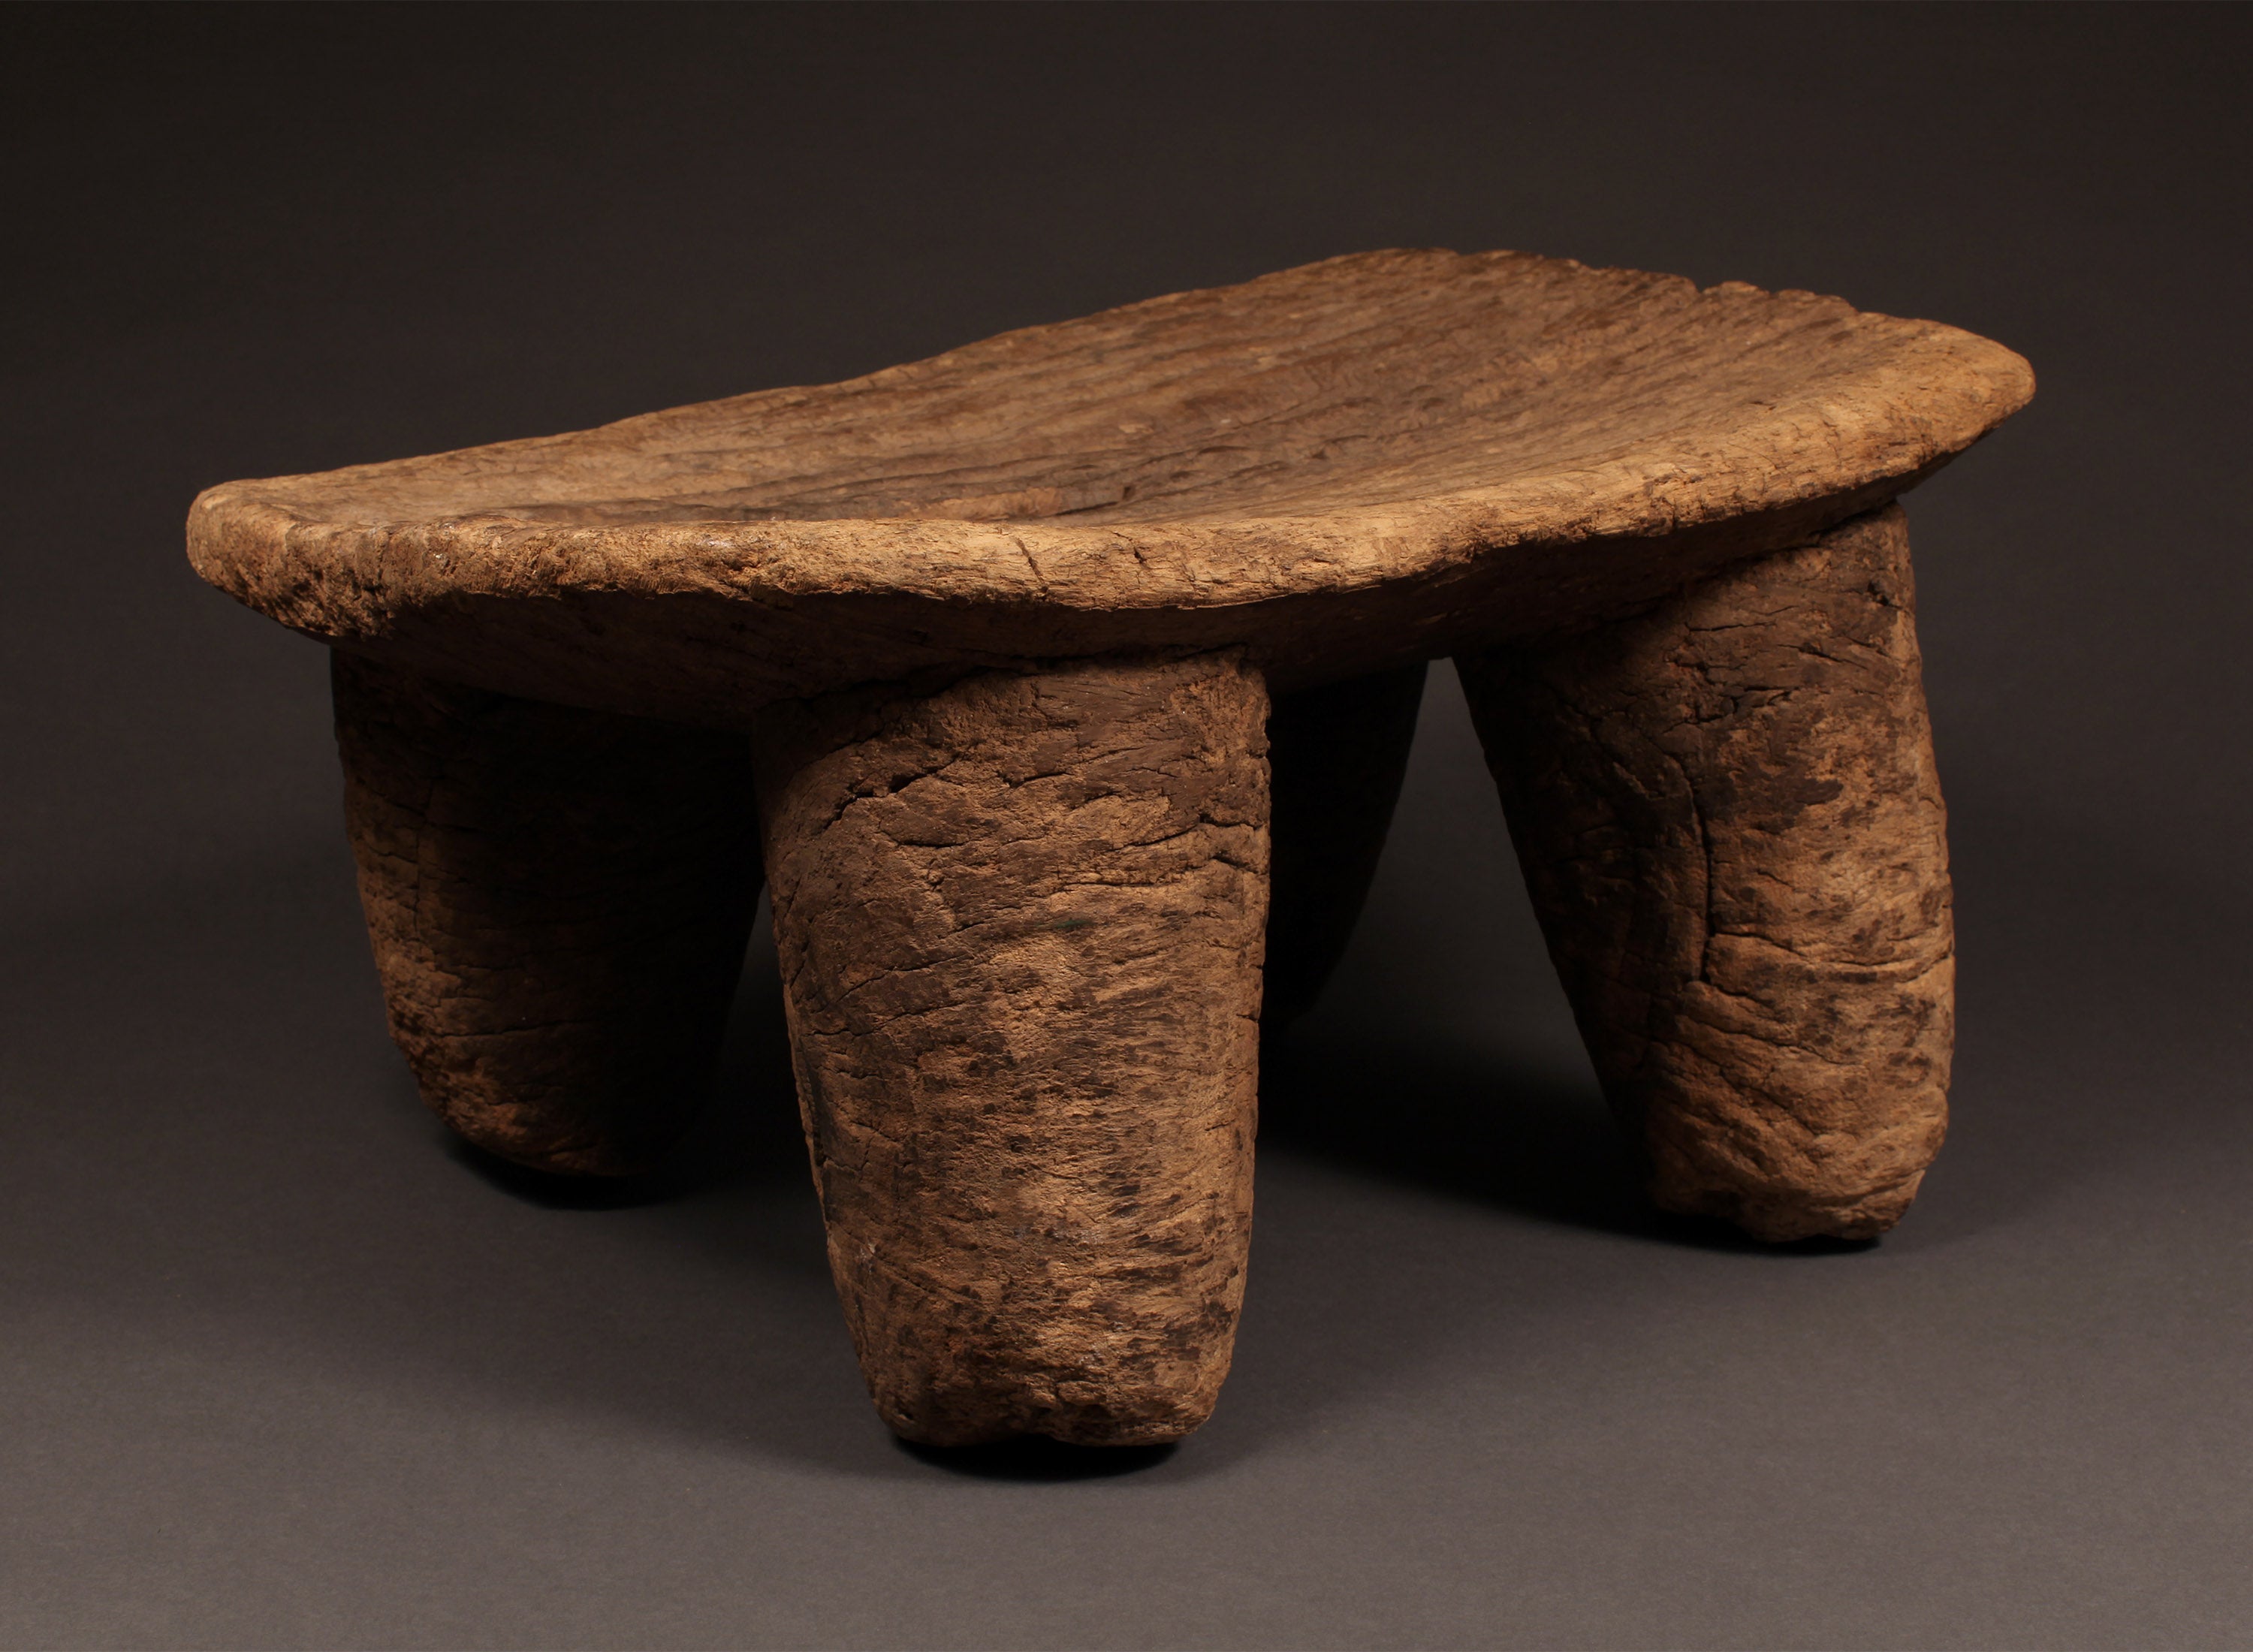 Tribal Furniture - African Art - Home Decor - African Stools - Chairs - Traditional Furniture - Collectible Art - This stunning antique stool is handcrafted from wood by the Senufo Tribe. Its rich, warm tones perfectly complement any home décor and its refined details make it a unique piece of art. Be sure to add this beautiful and functional piece to your collection.